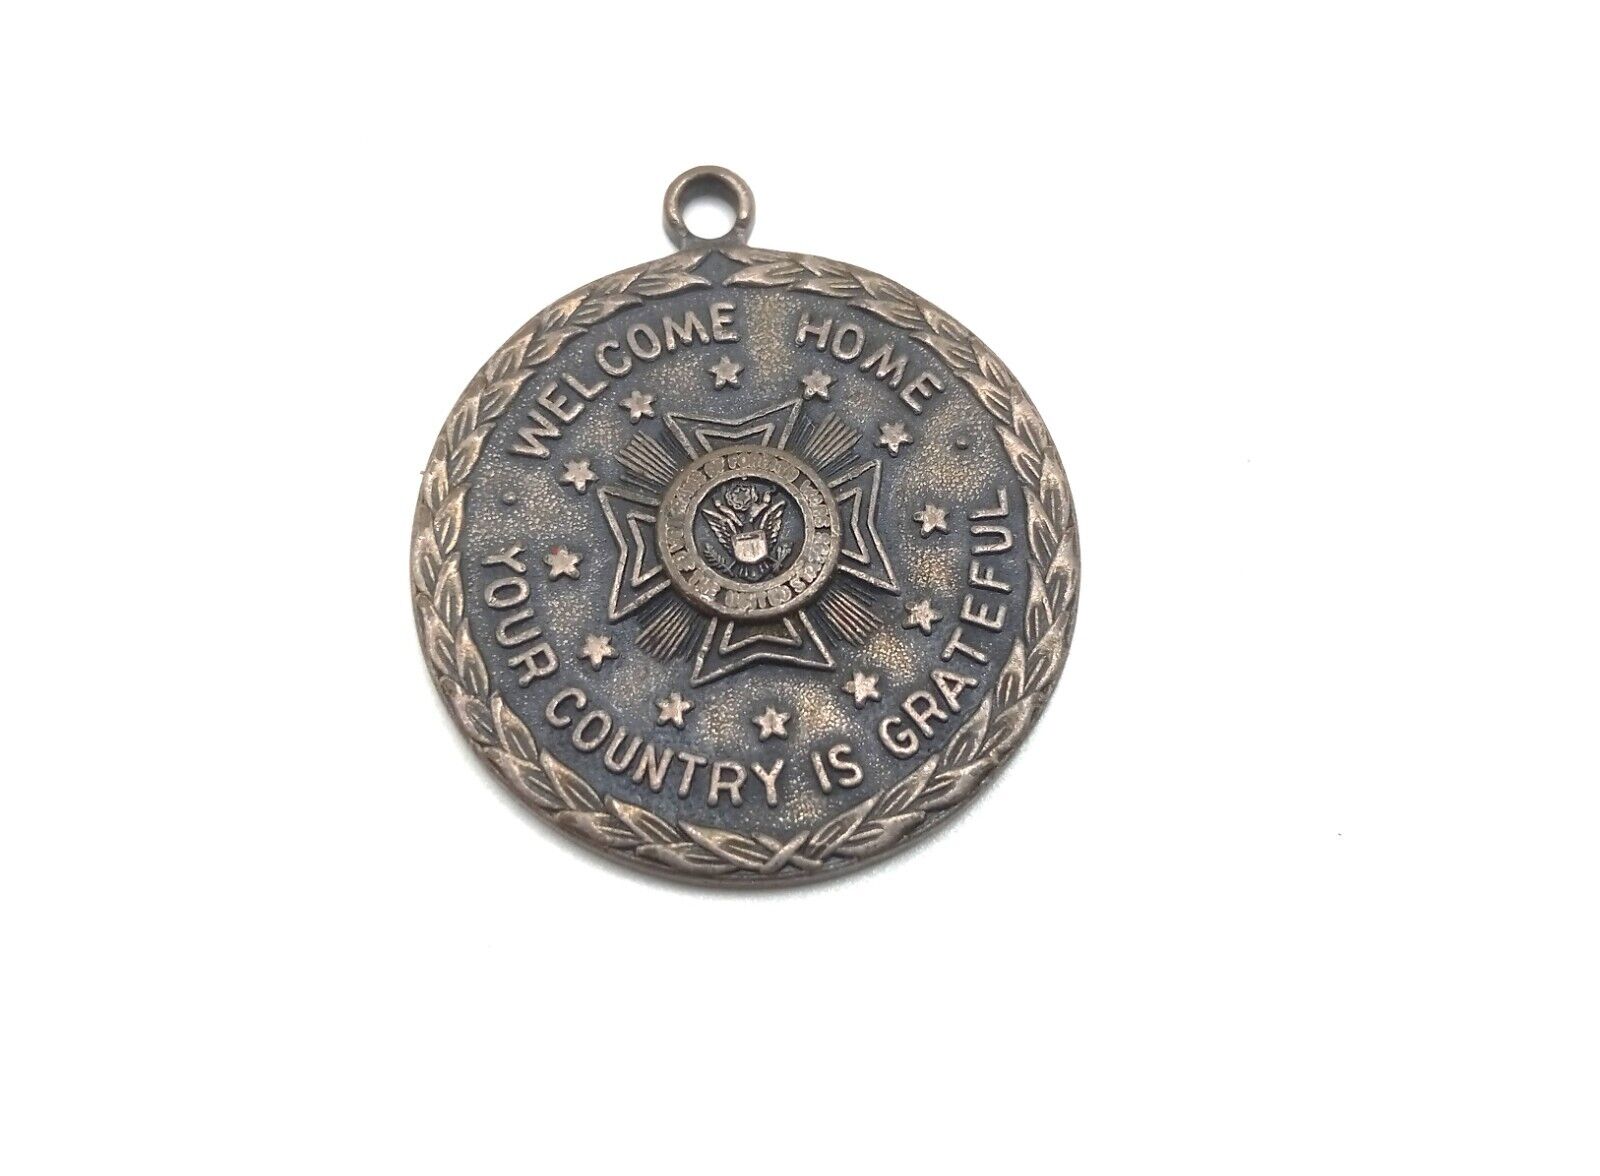 WWII VFW Vetrans of Foreign Wars Welcome Home Medal Charm Key Chain Fob